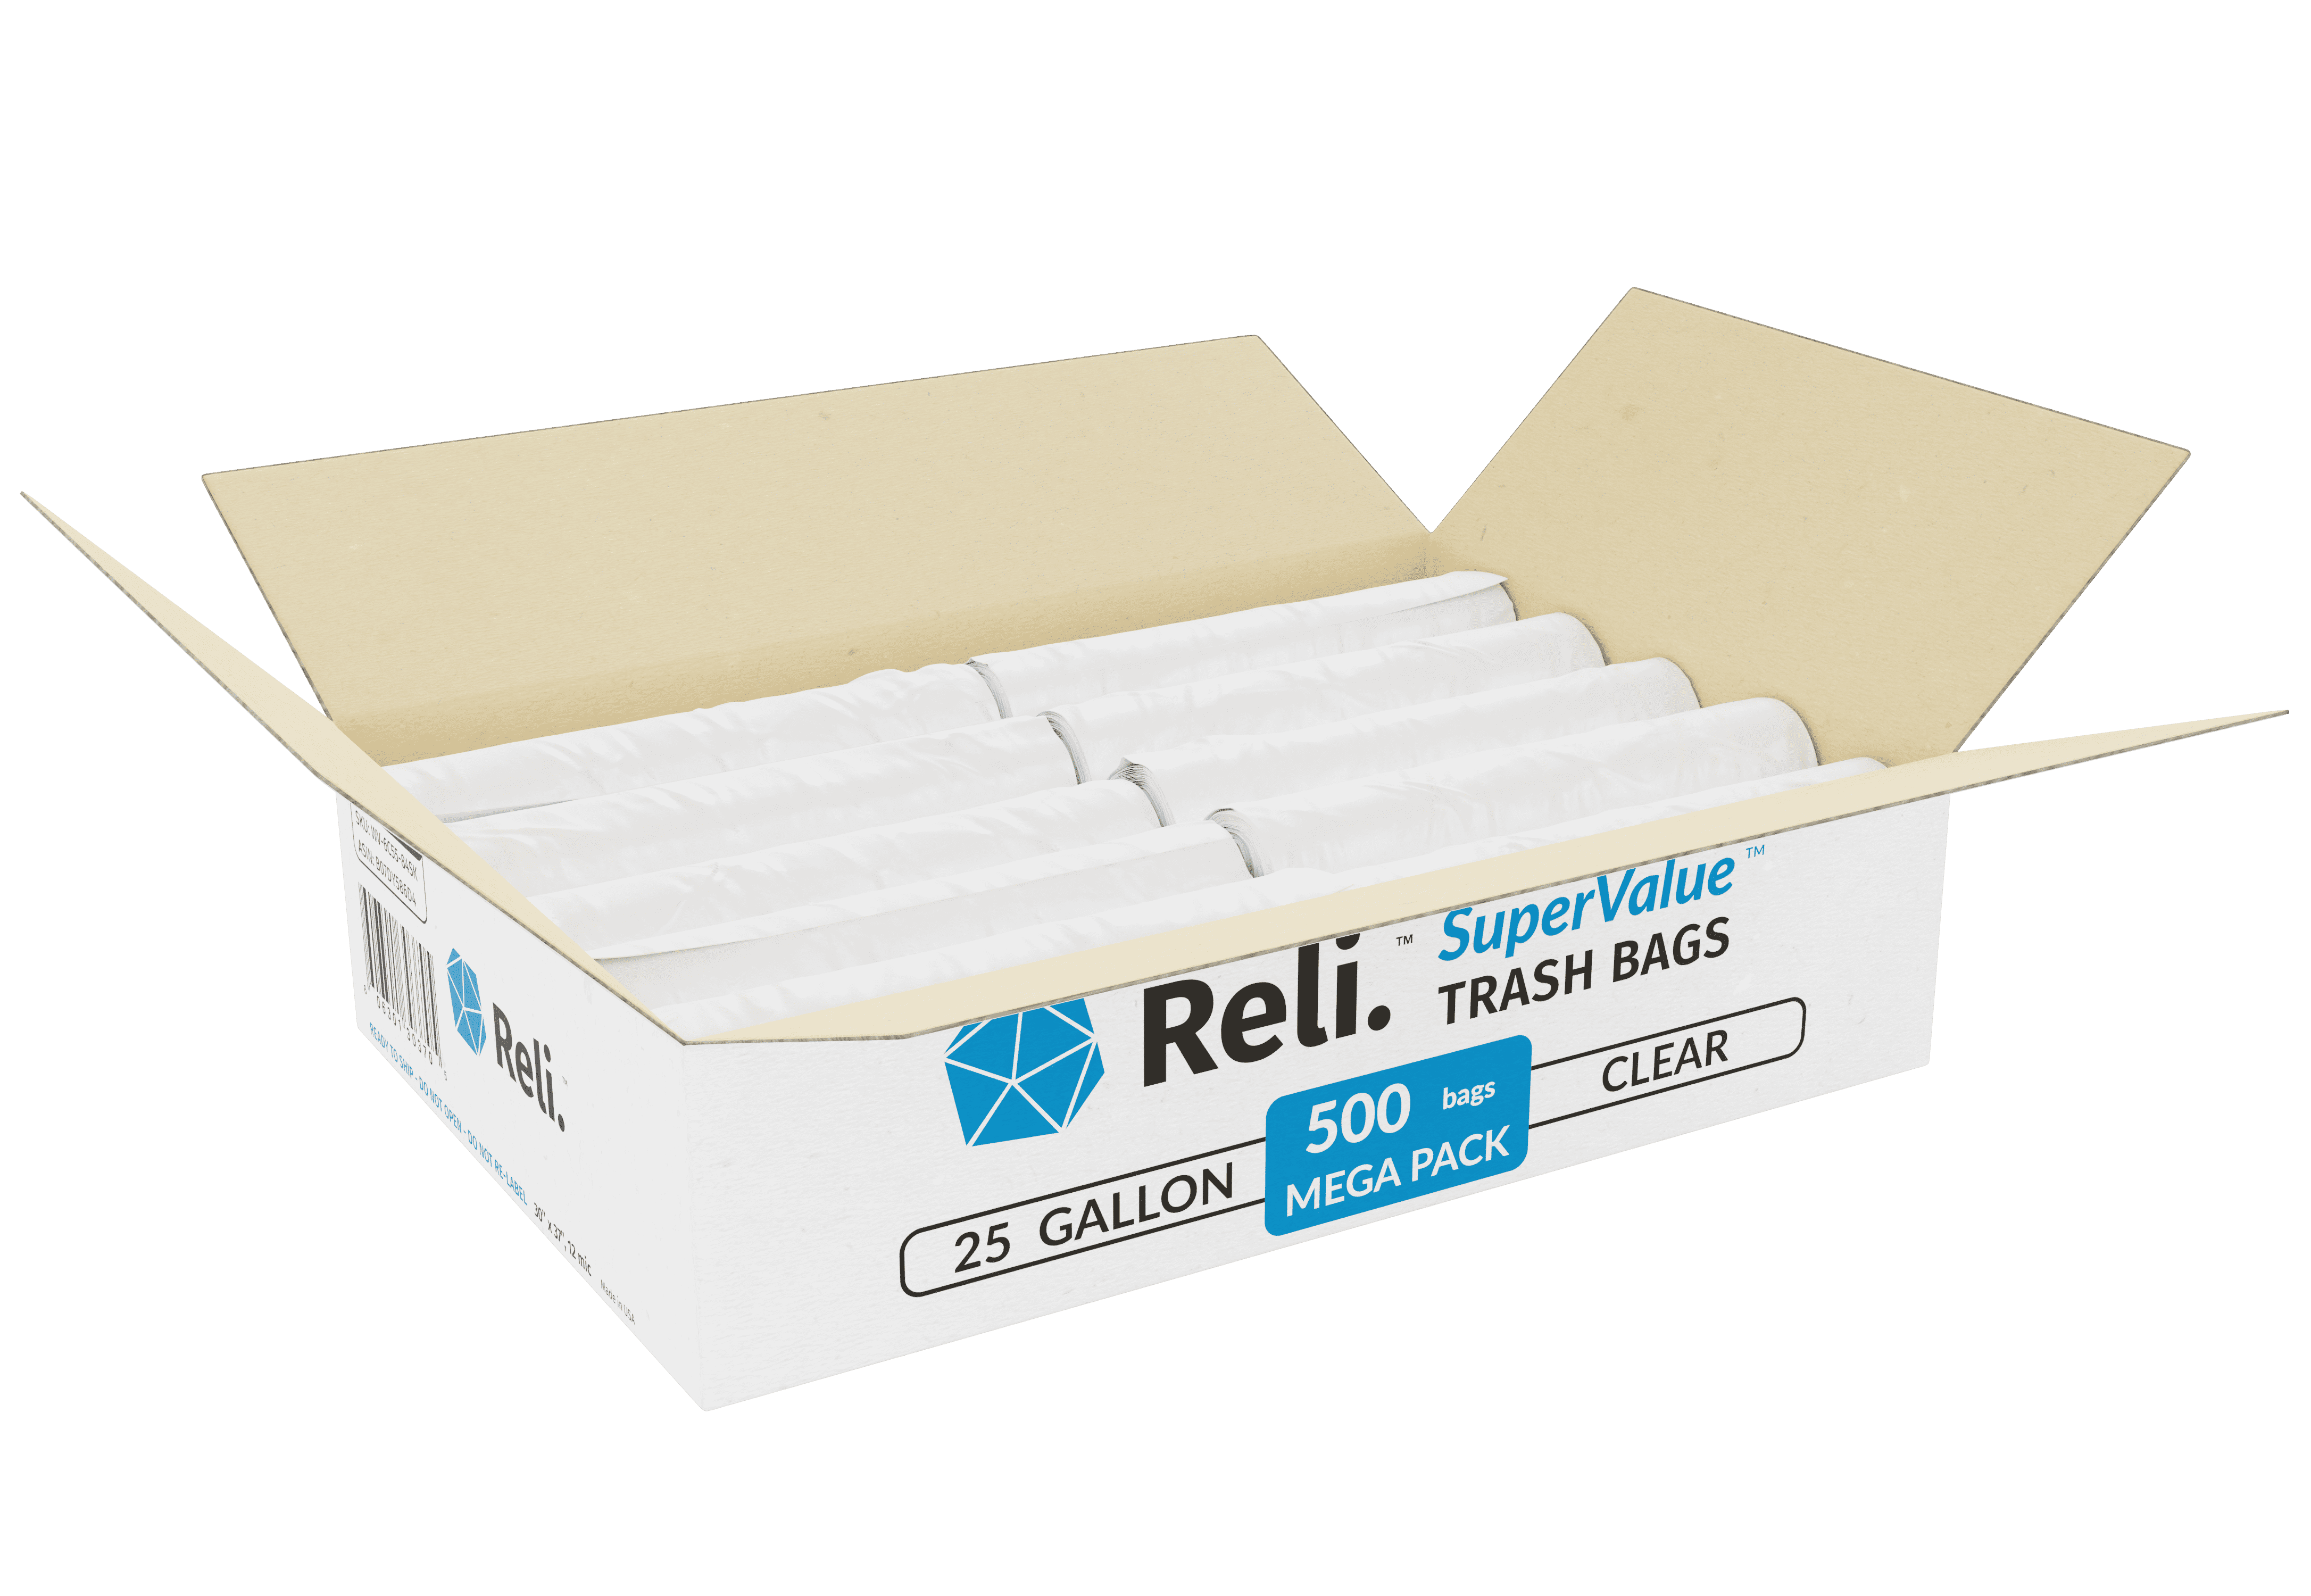  Reli. SuperValue 16-25 Gallon Trash Bags (500 Count Bulk) Clear Garbage  bags : Health & Household